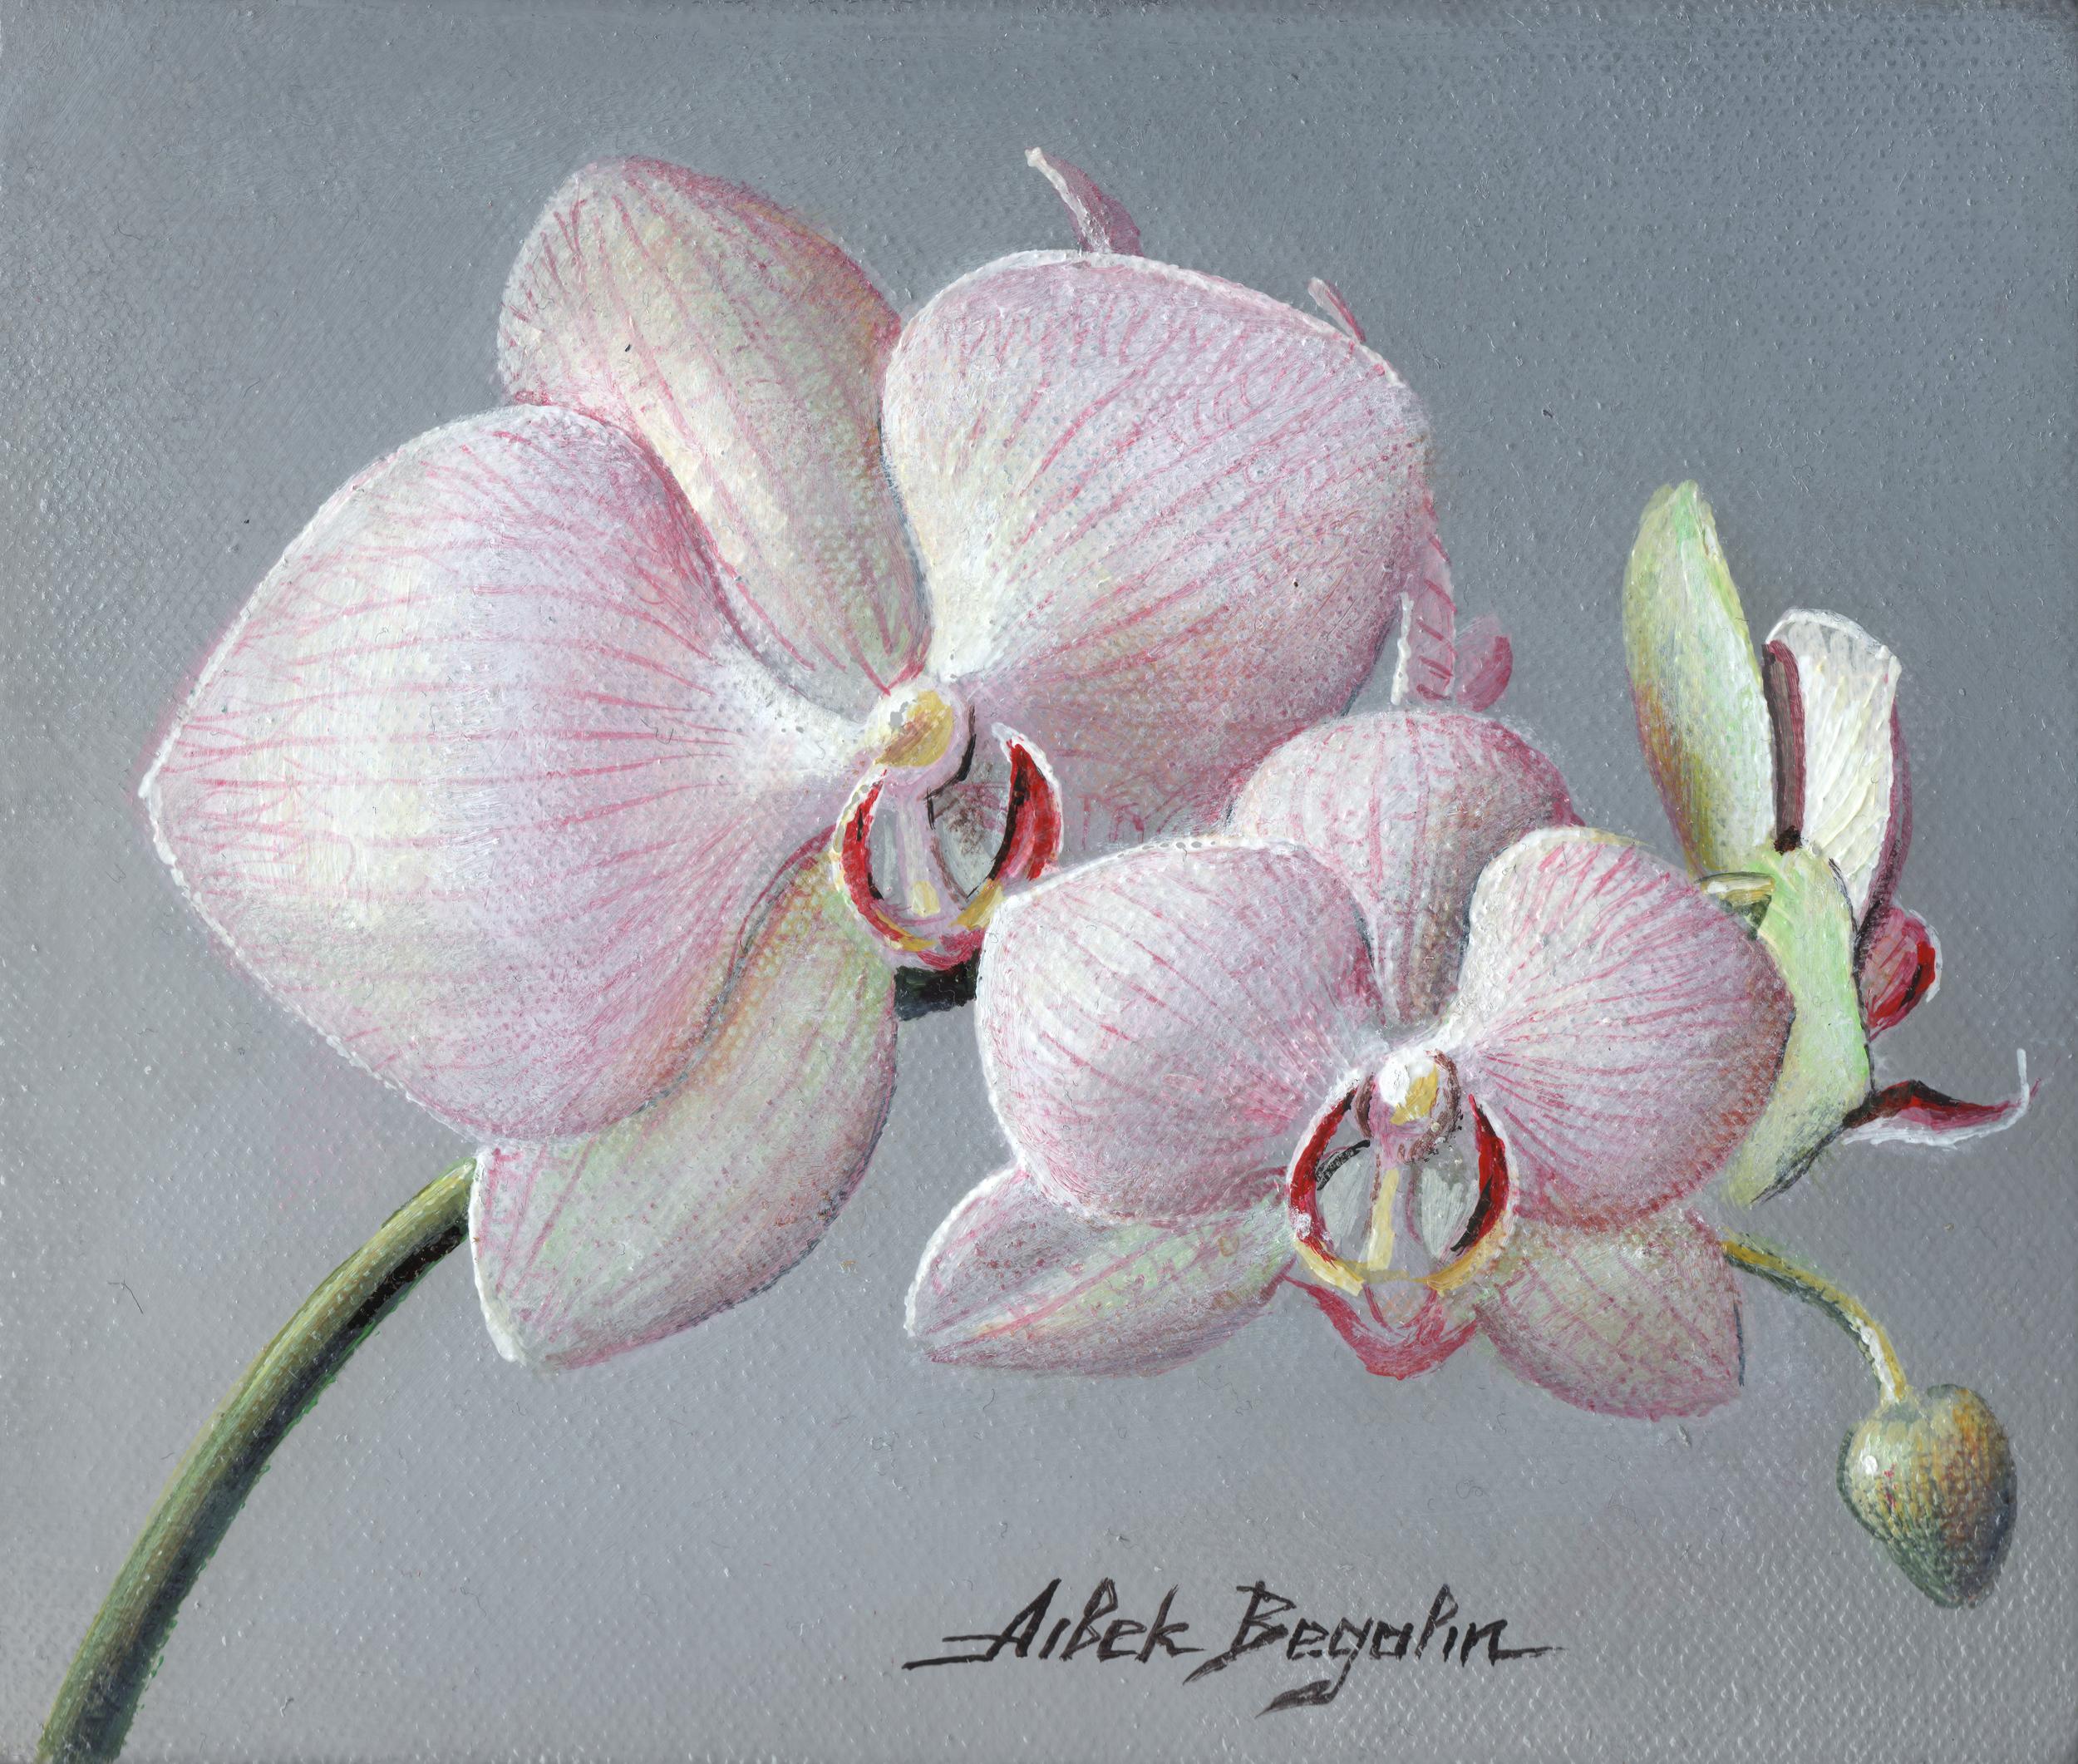 Aibek Begalin Landscape Painting - Orchid, Original Oil Painting, Ready to Hang